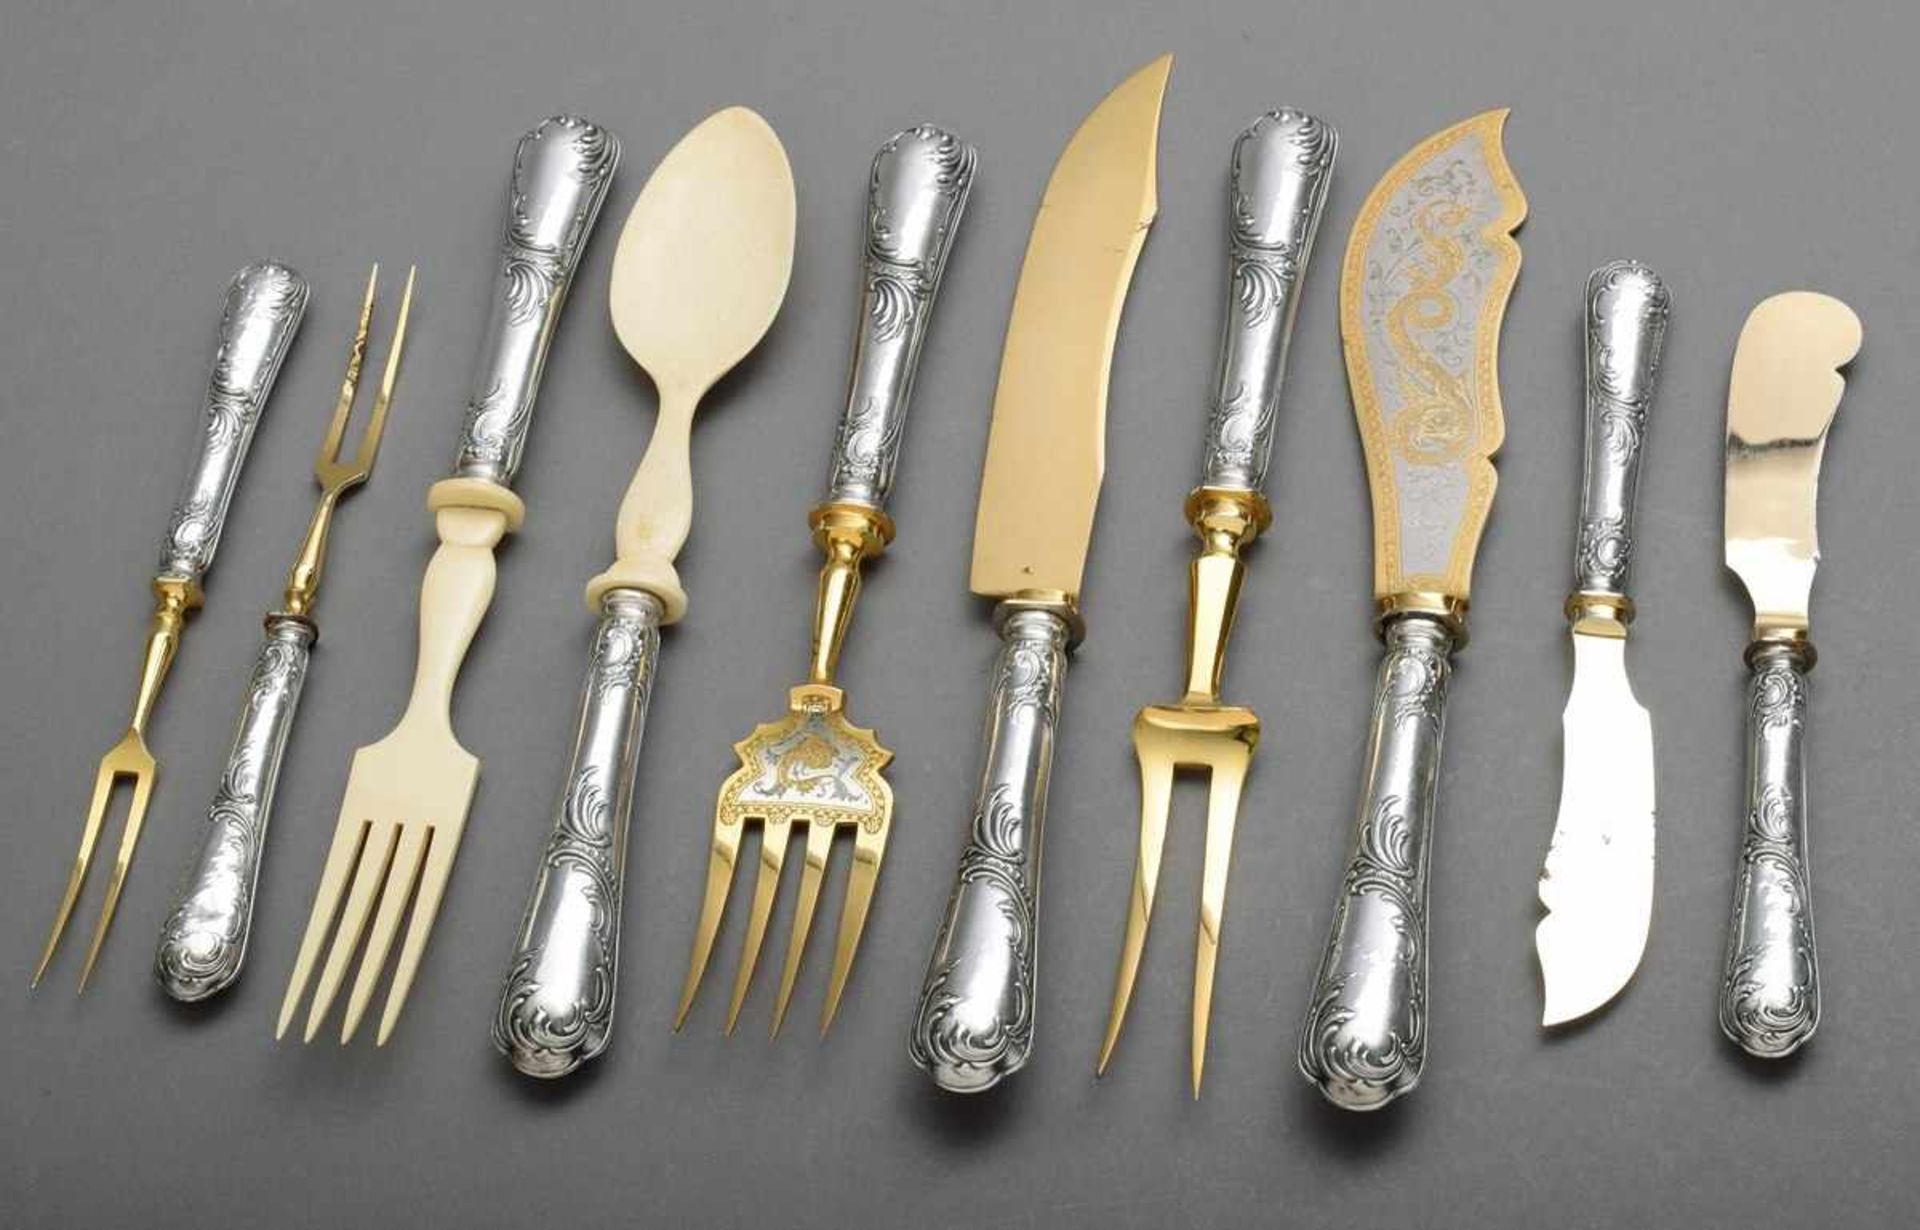 10 presentation pieces with silver 800 handles "Rocaille" in relief and gold-plated steel and bone